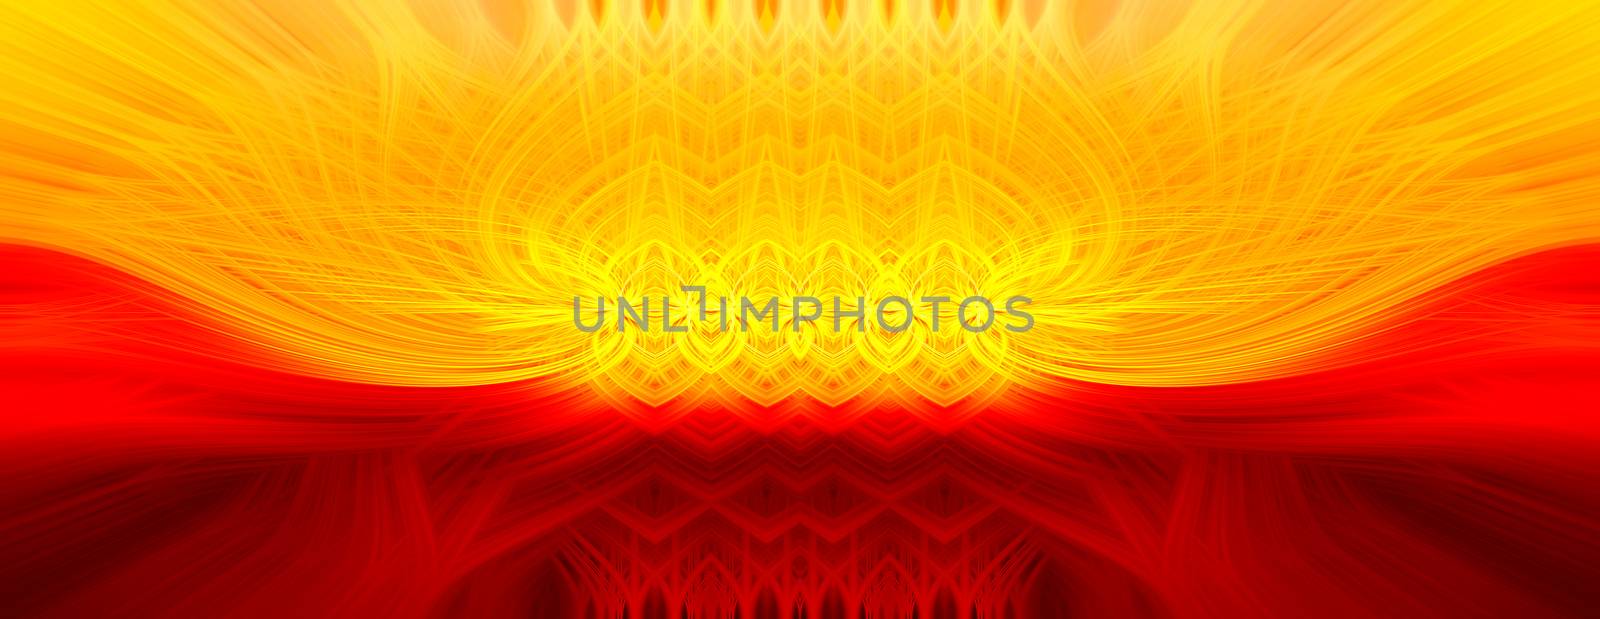 Beautiful abstract intertwined symmetrical 3d fibers forming a shape of sparkle, flame, flower, interlinked hearts. Red and yellow colors. Illustration. Banner and panorama size.